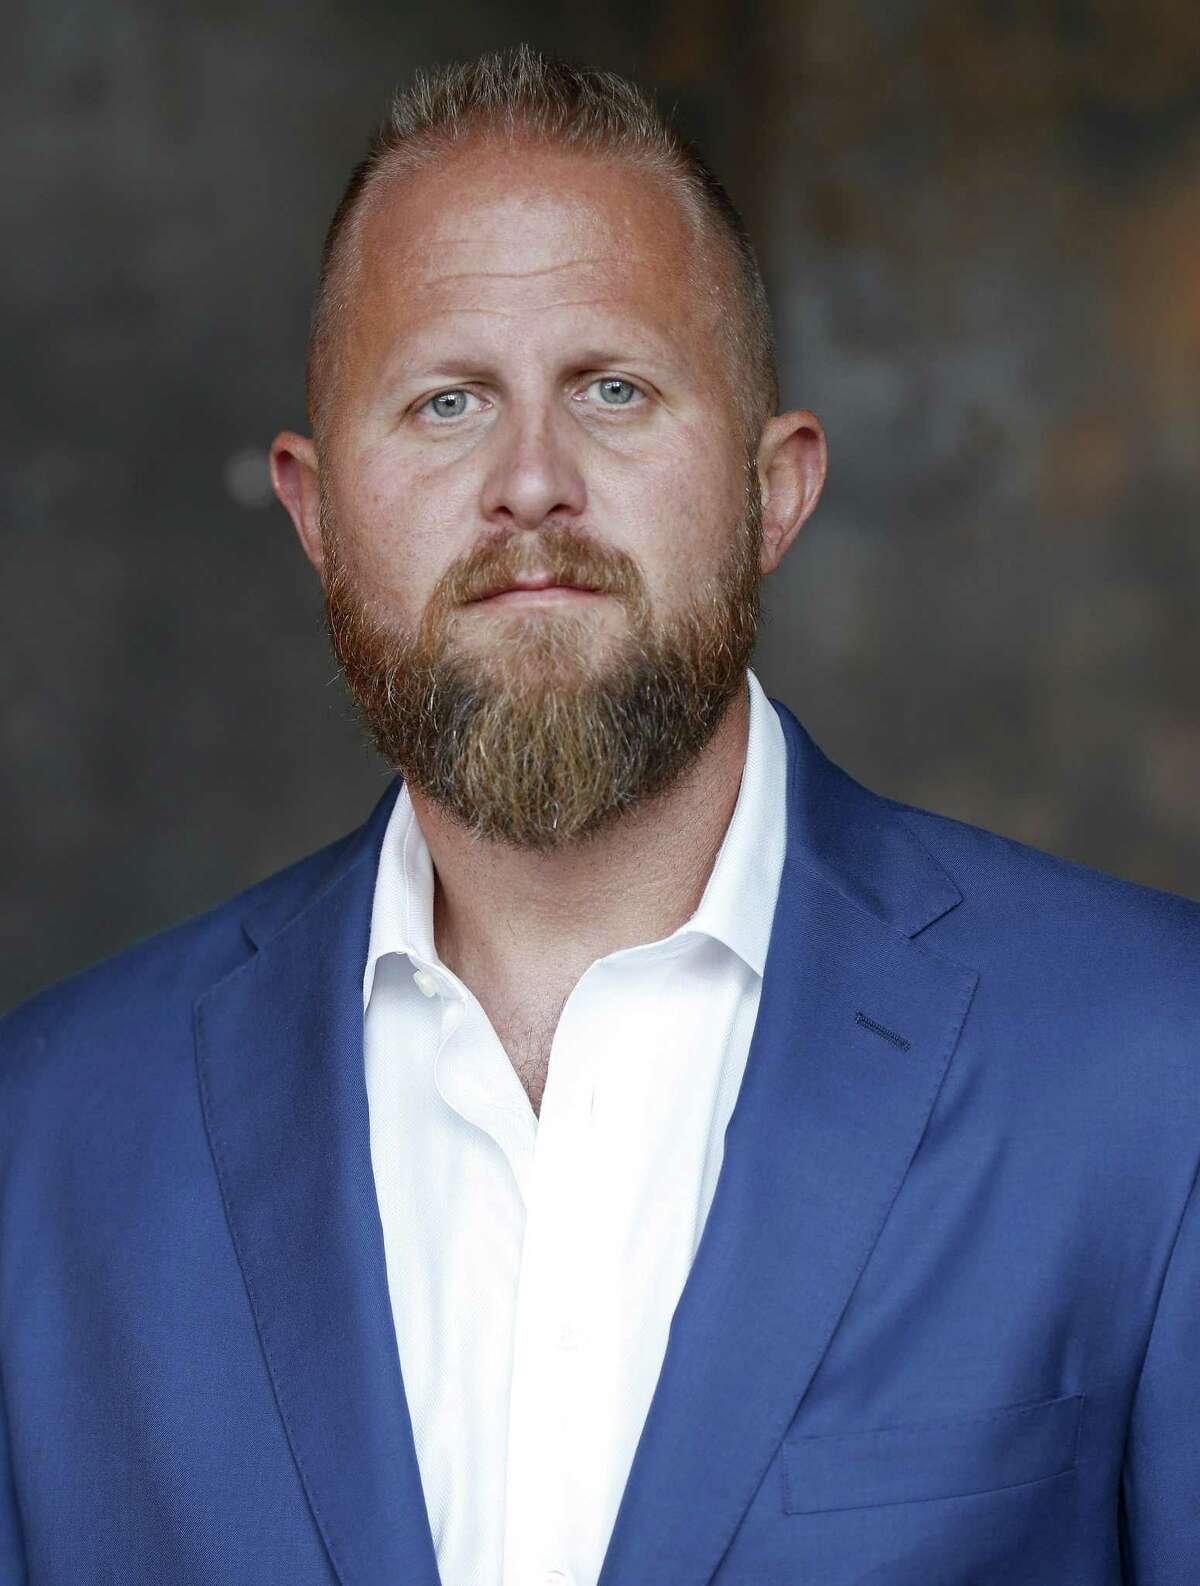 Portrait of Brad Parscale Monday July 10, 2017 at Giles- Parscale. Parscale is campaign adviser to President Donald Trump.